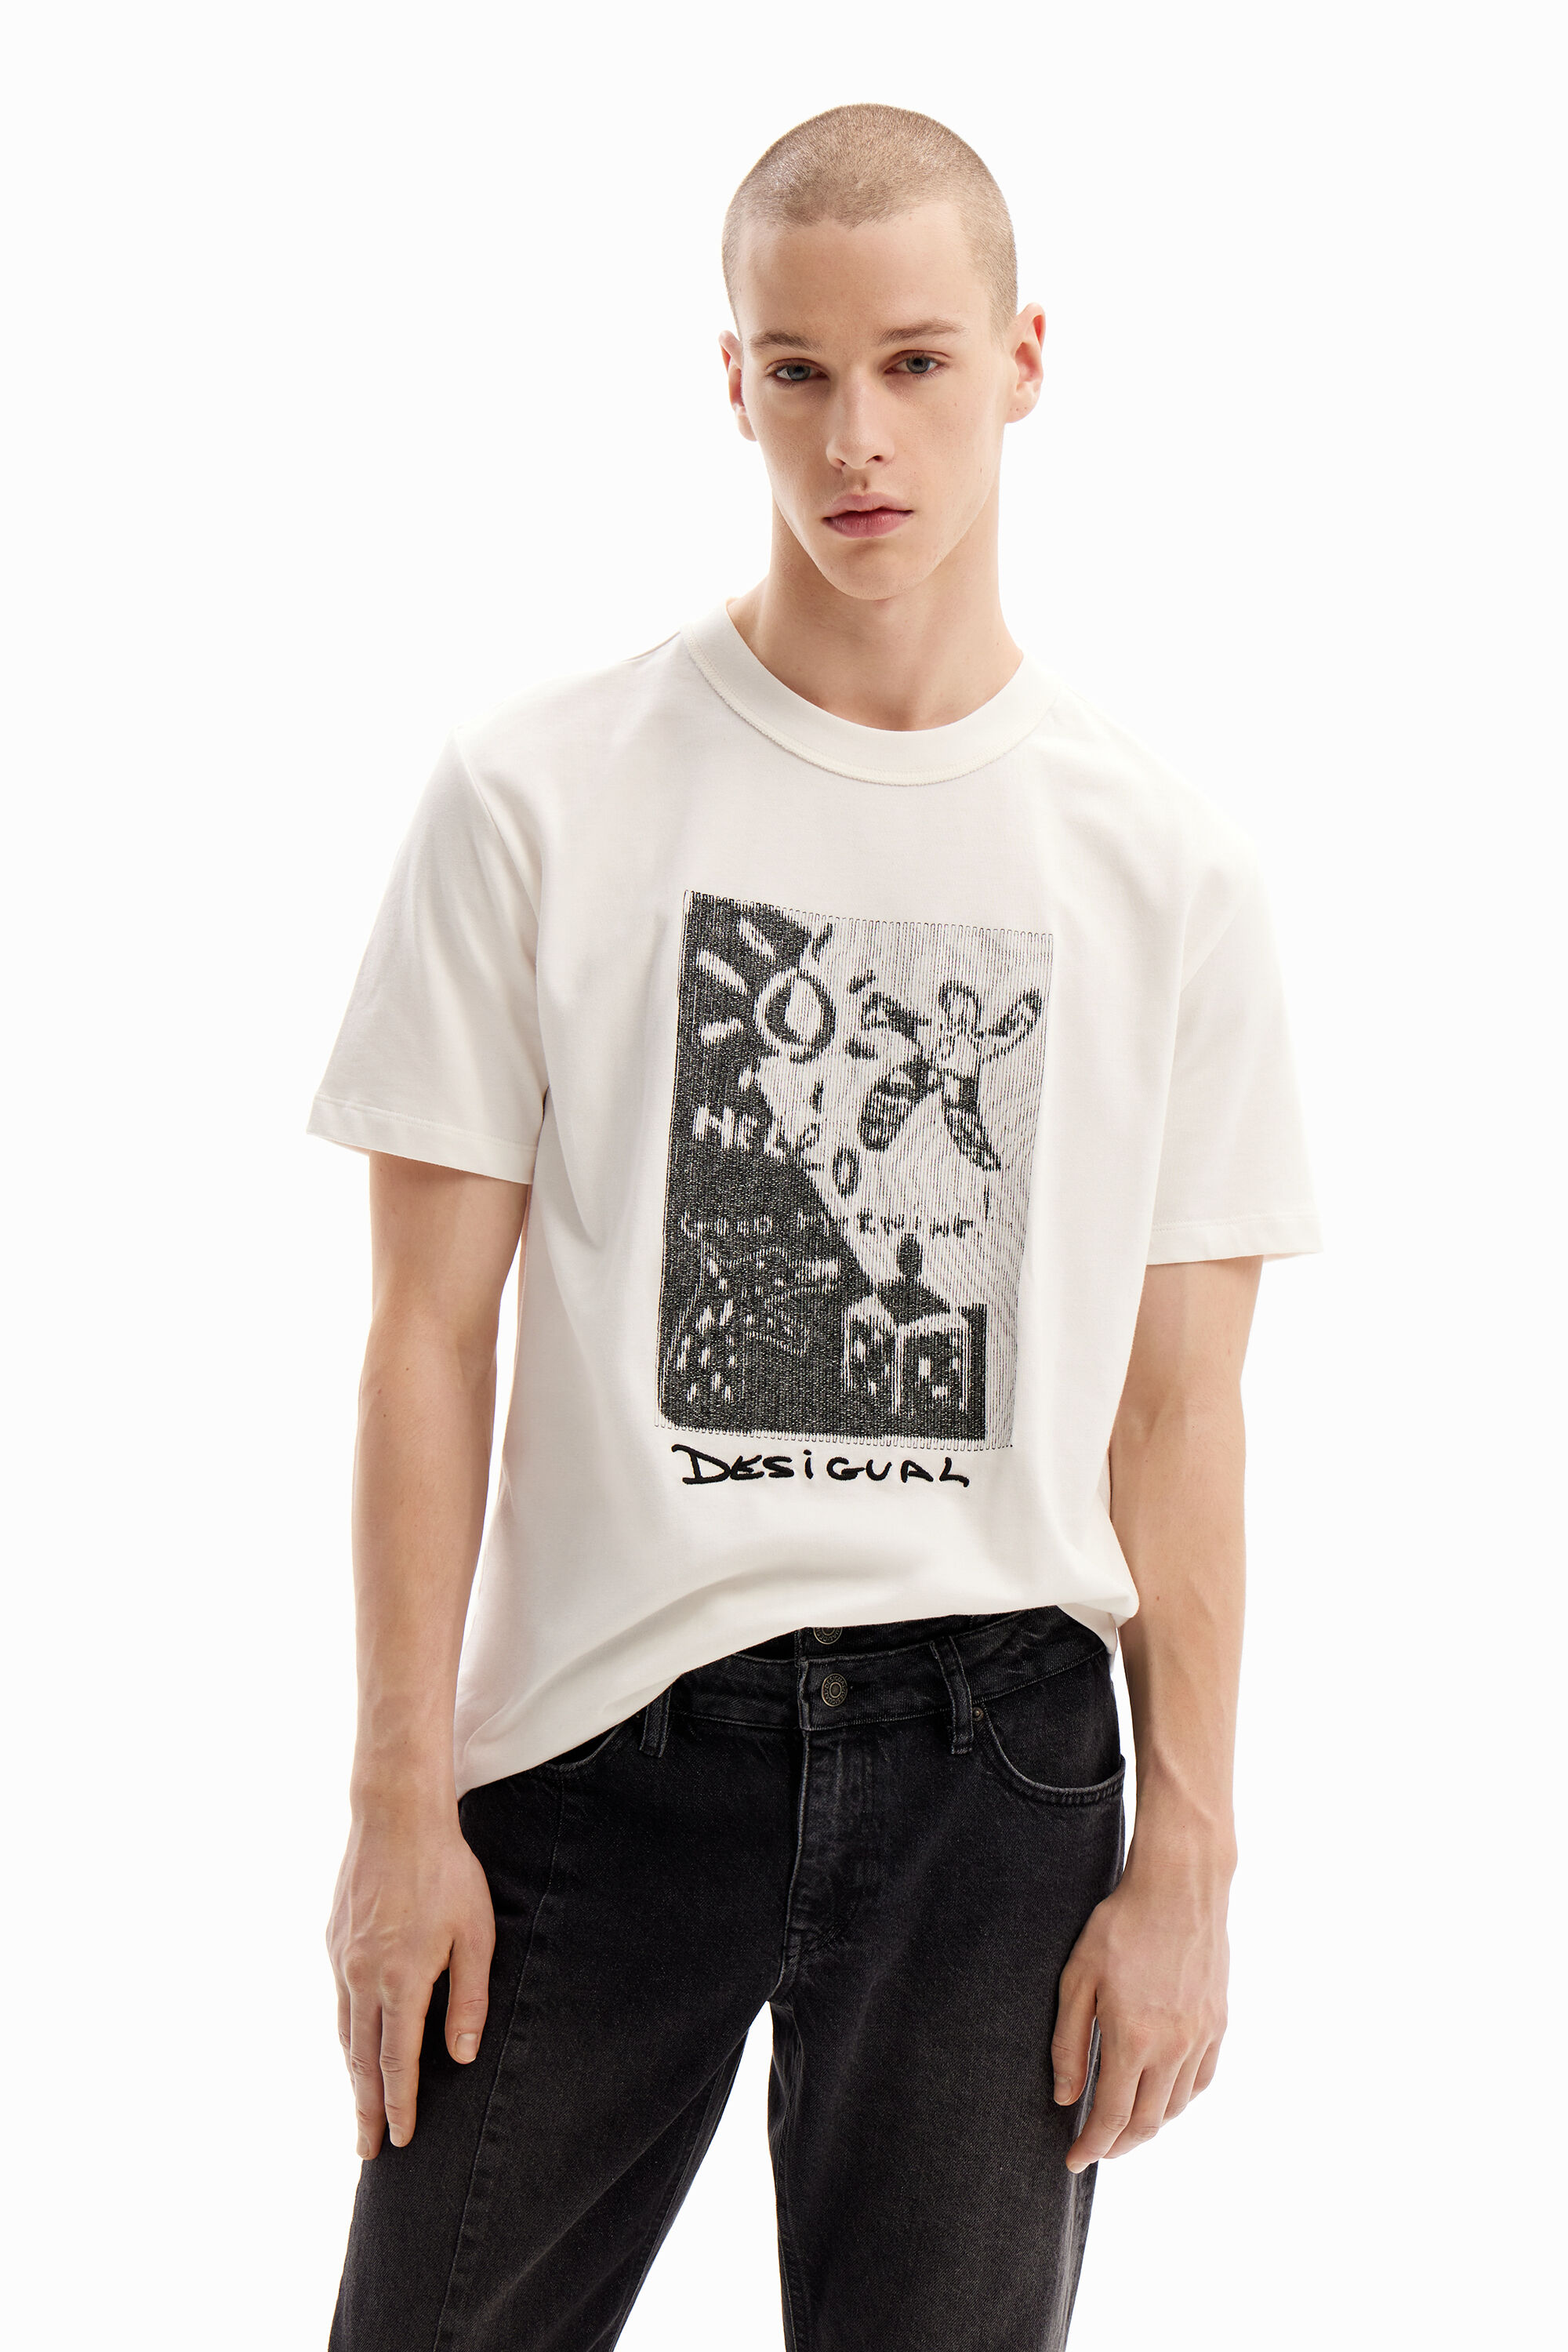 Desigual Arty embroidered T-shirt